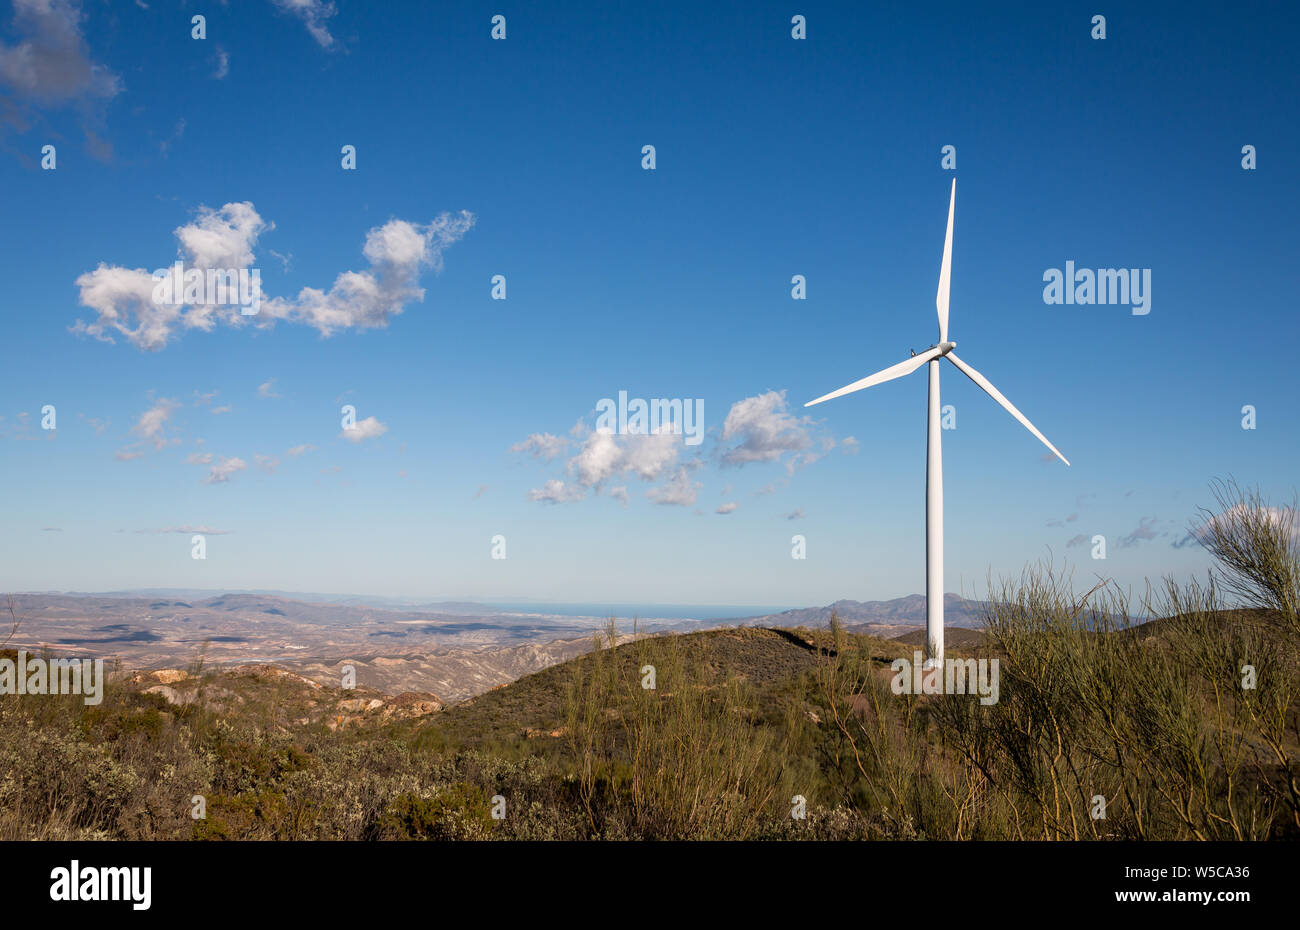 A landscape view in the desert of Sierra Alhamilla in Andalusia Spain, with a wind turbine and a blue sky with white clouds Stock Photo